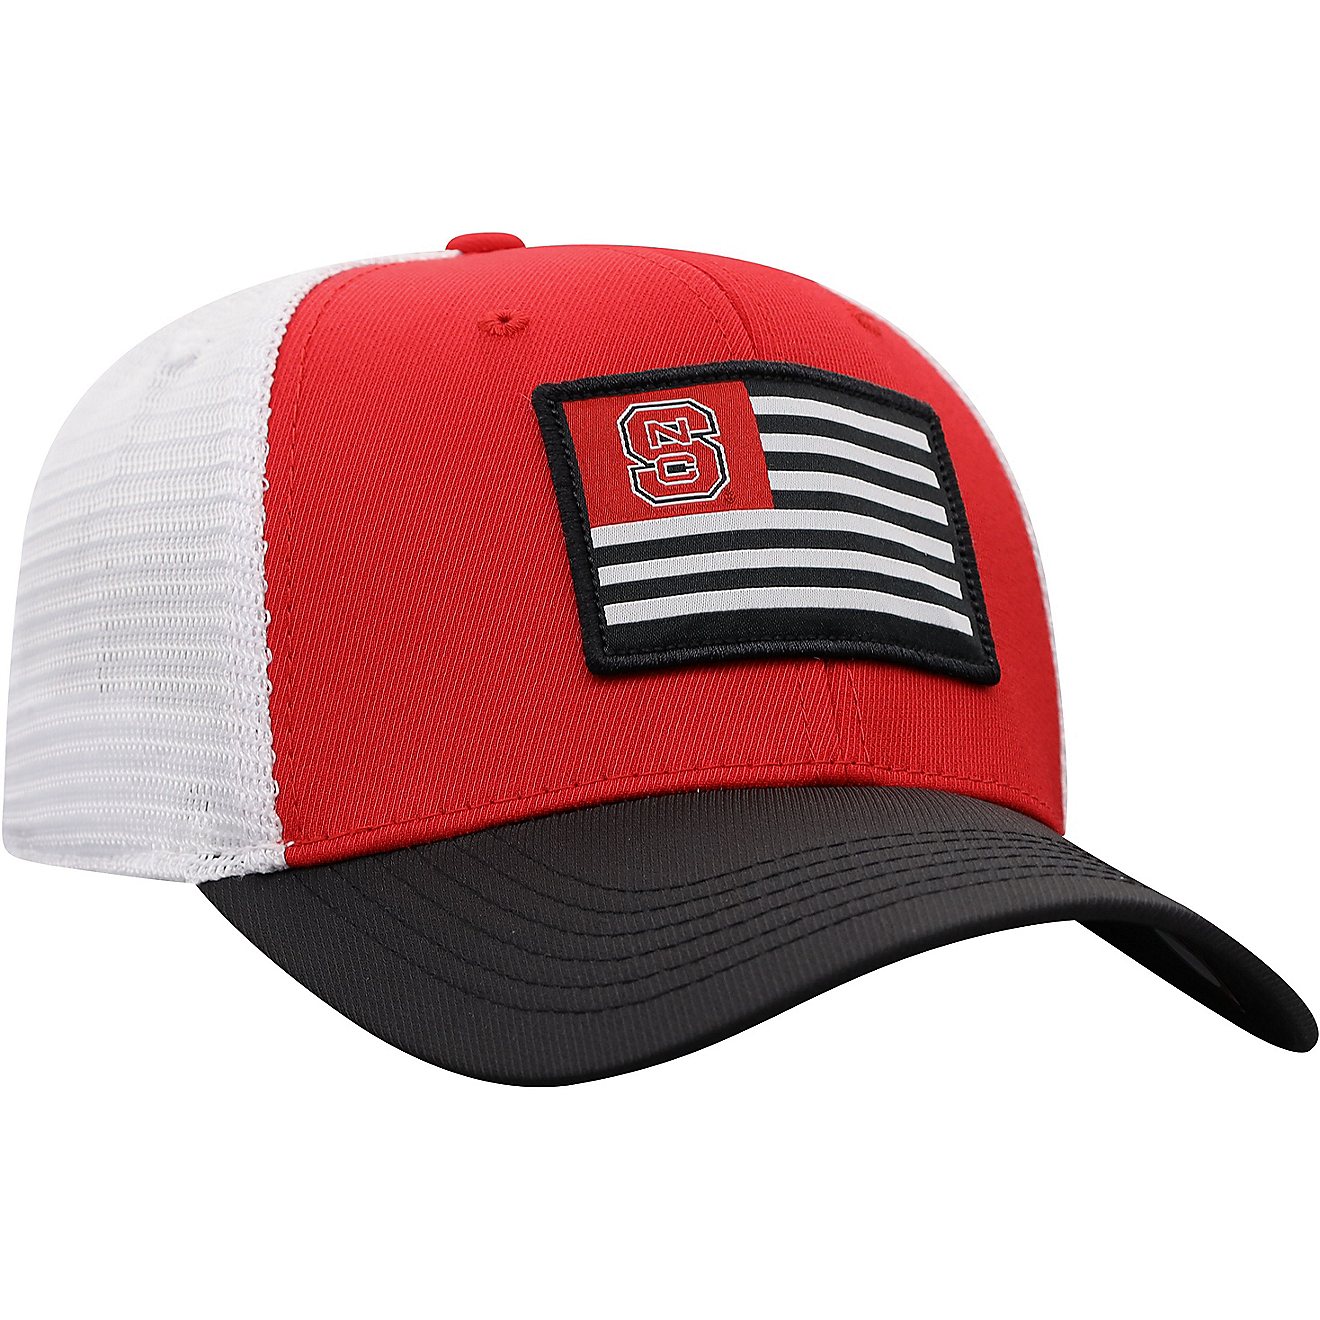 Top of the World North Carolina State University Pedigree 1 Fit Cap                                                              - view number 4